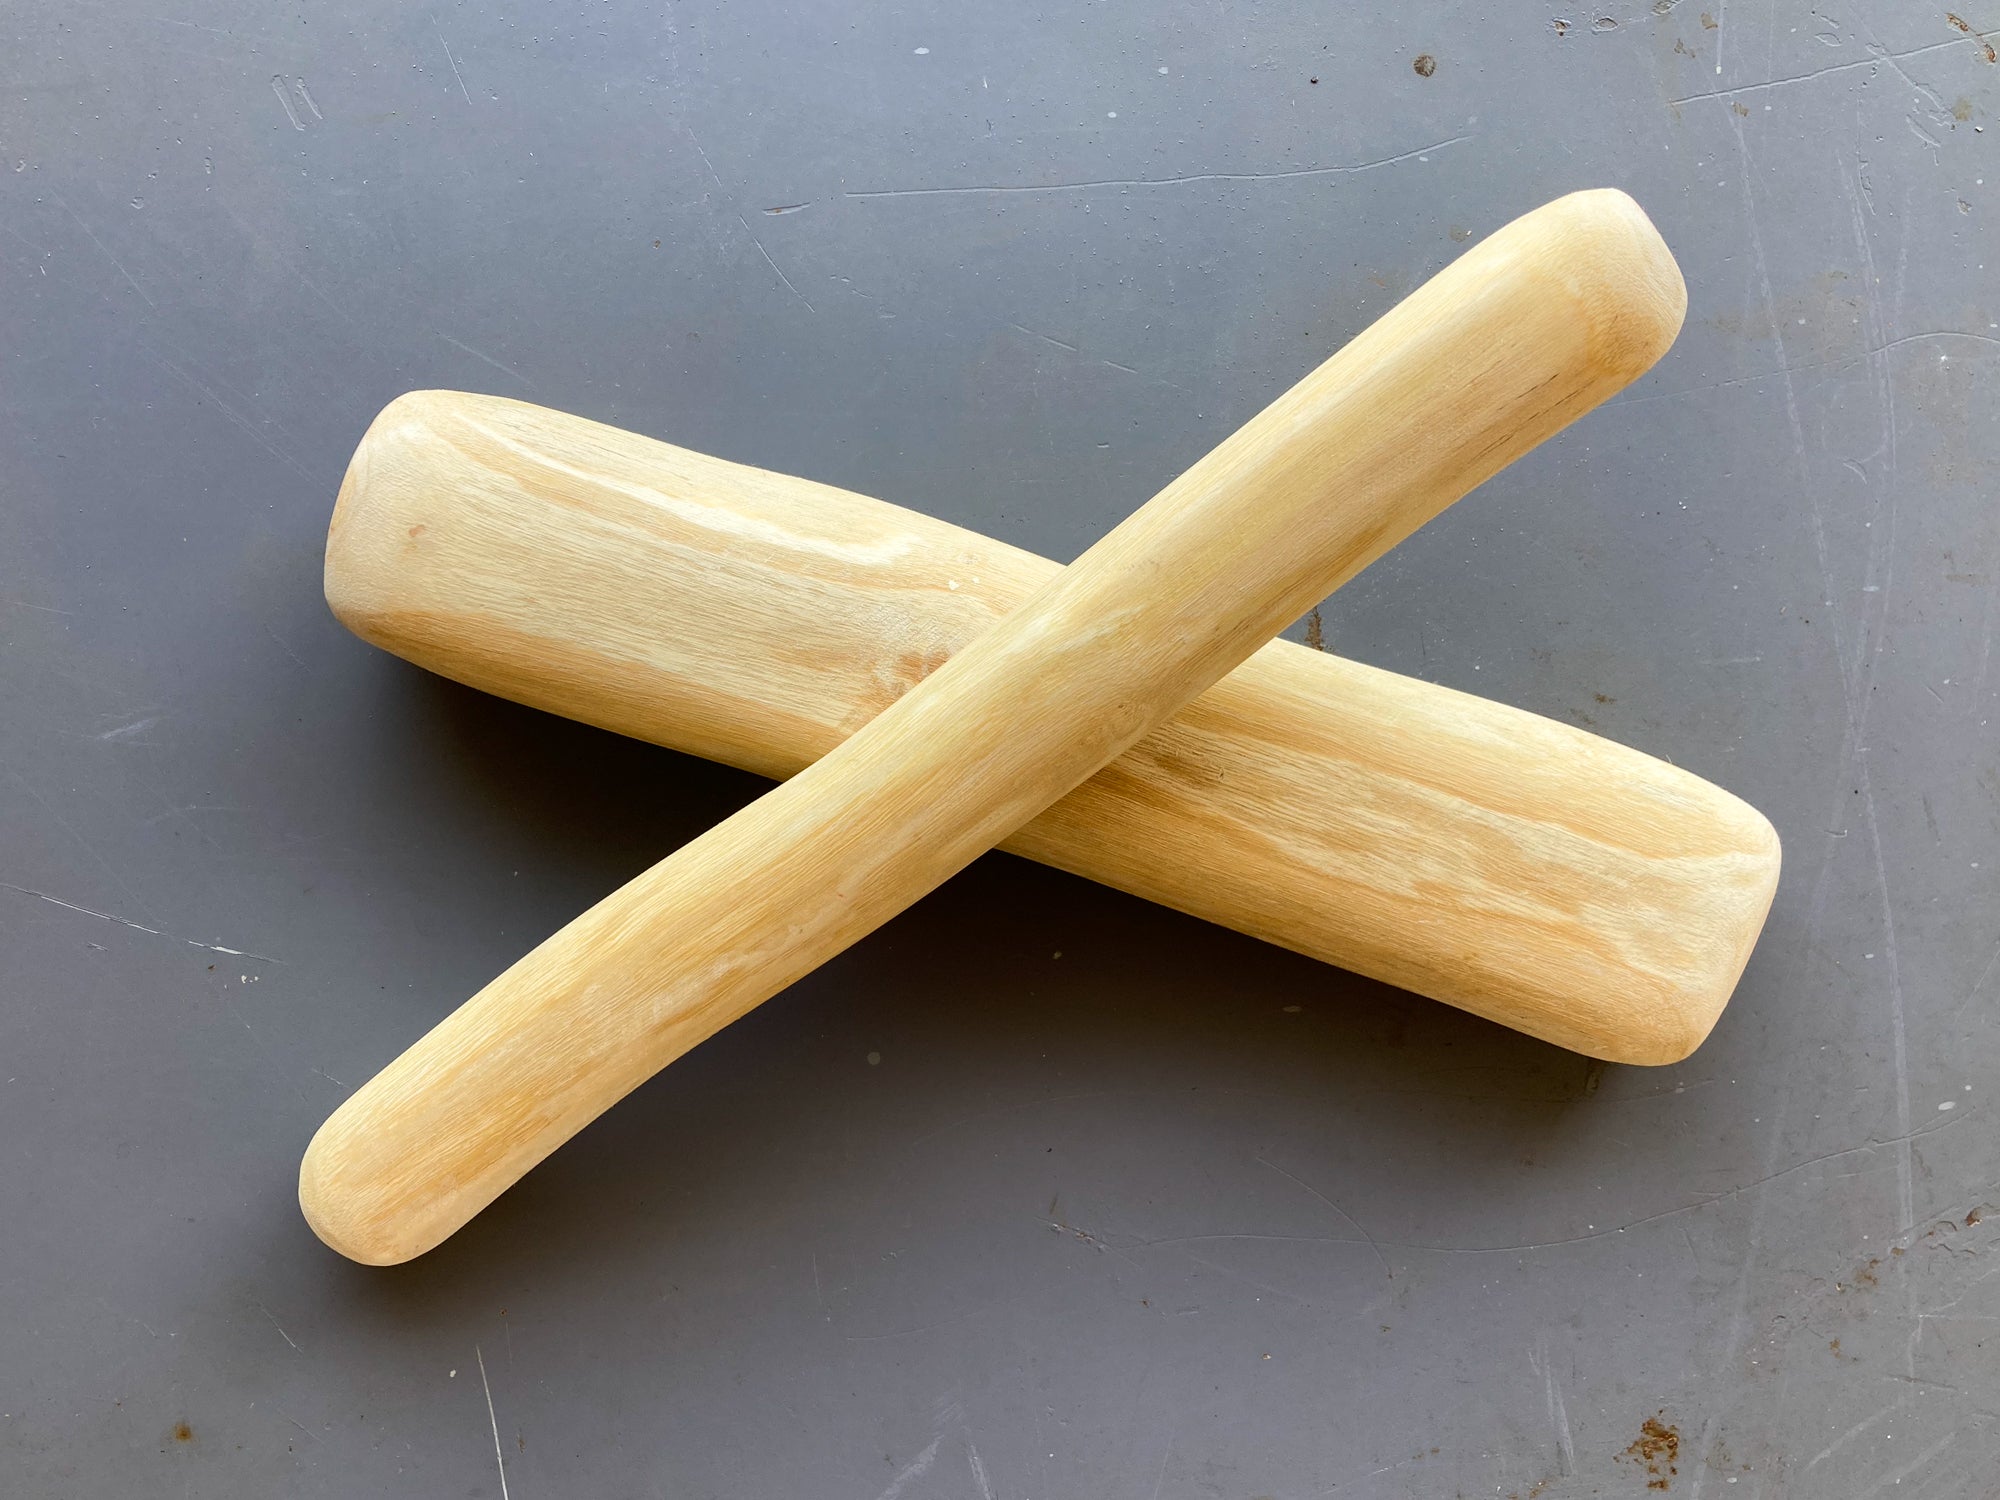 Hand-carved Ironwood Clap sticks (natural)